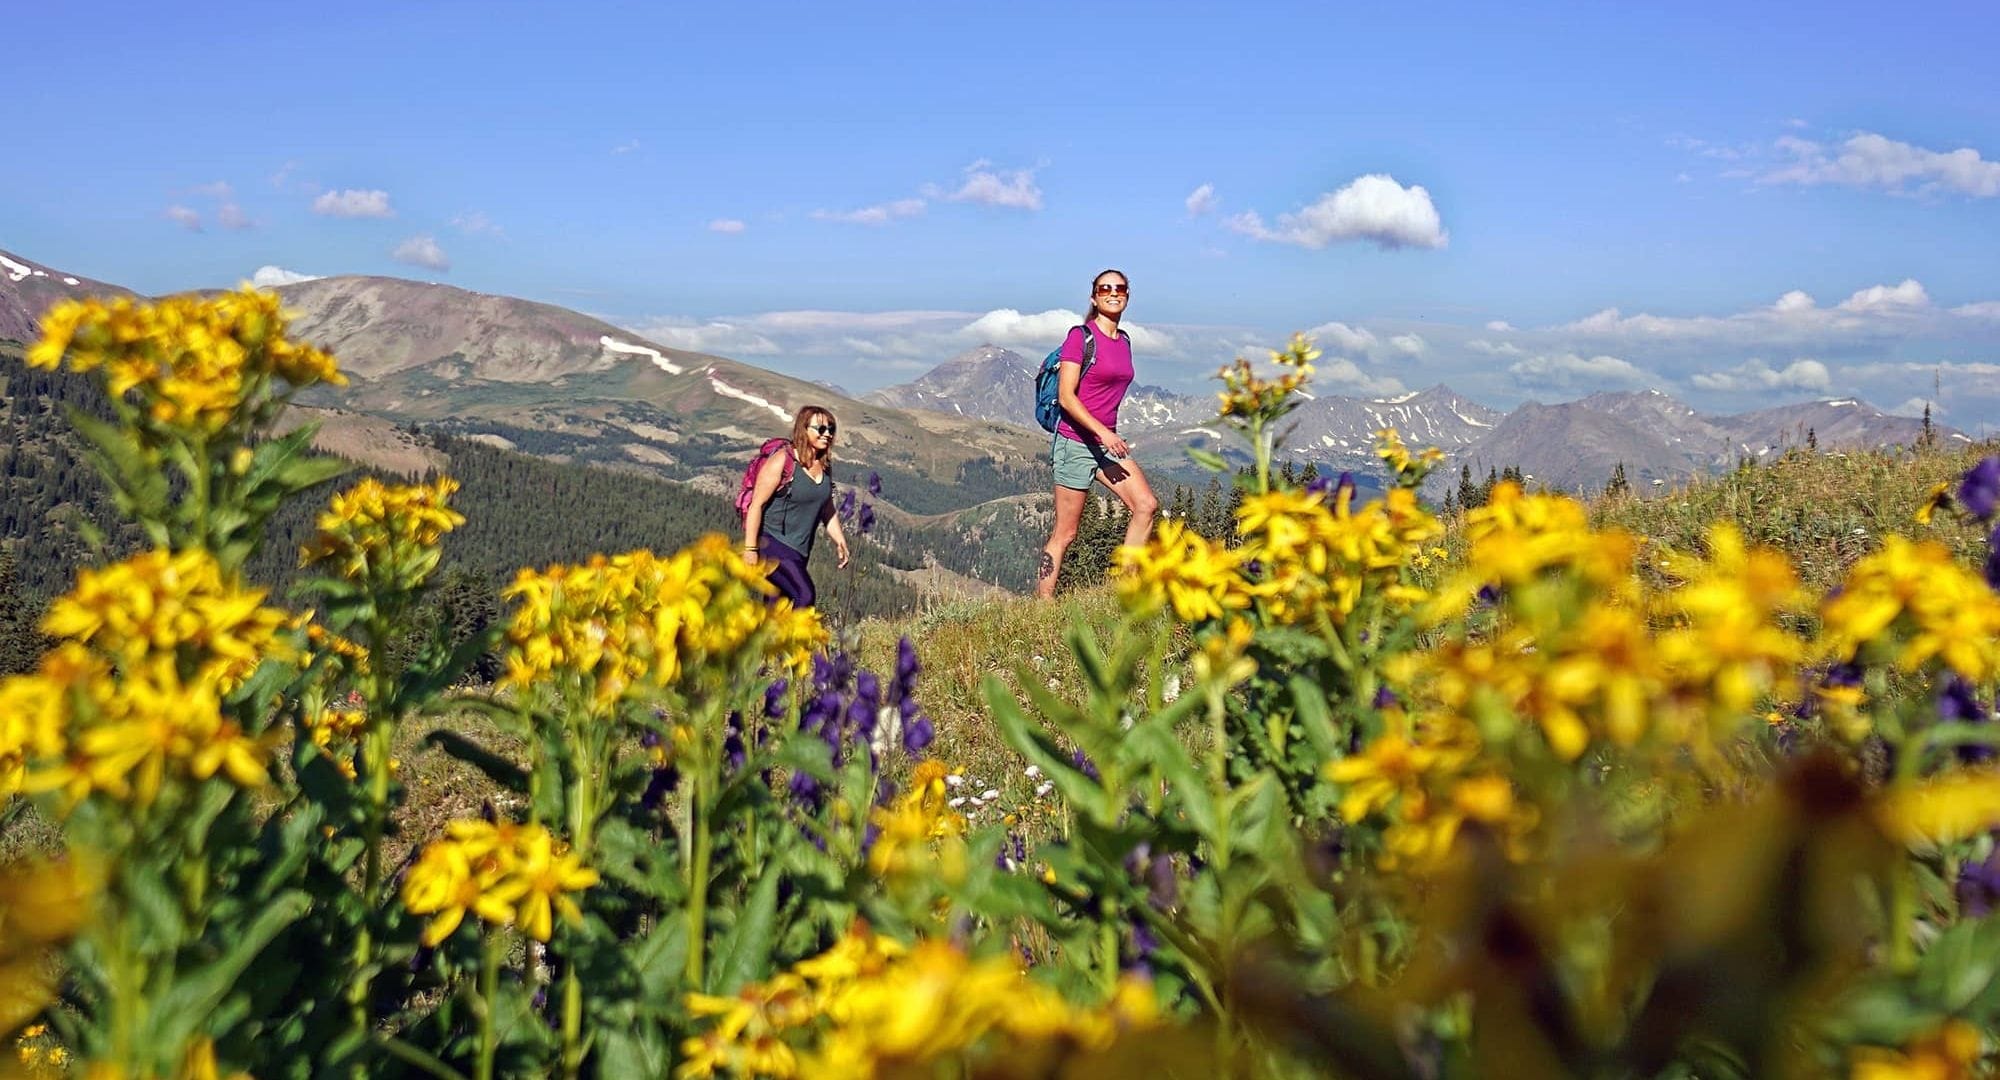 Breckenridge hikers among yellow wildflowers with a stunning view